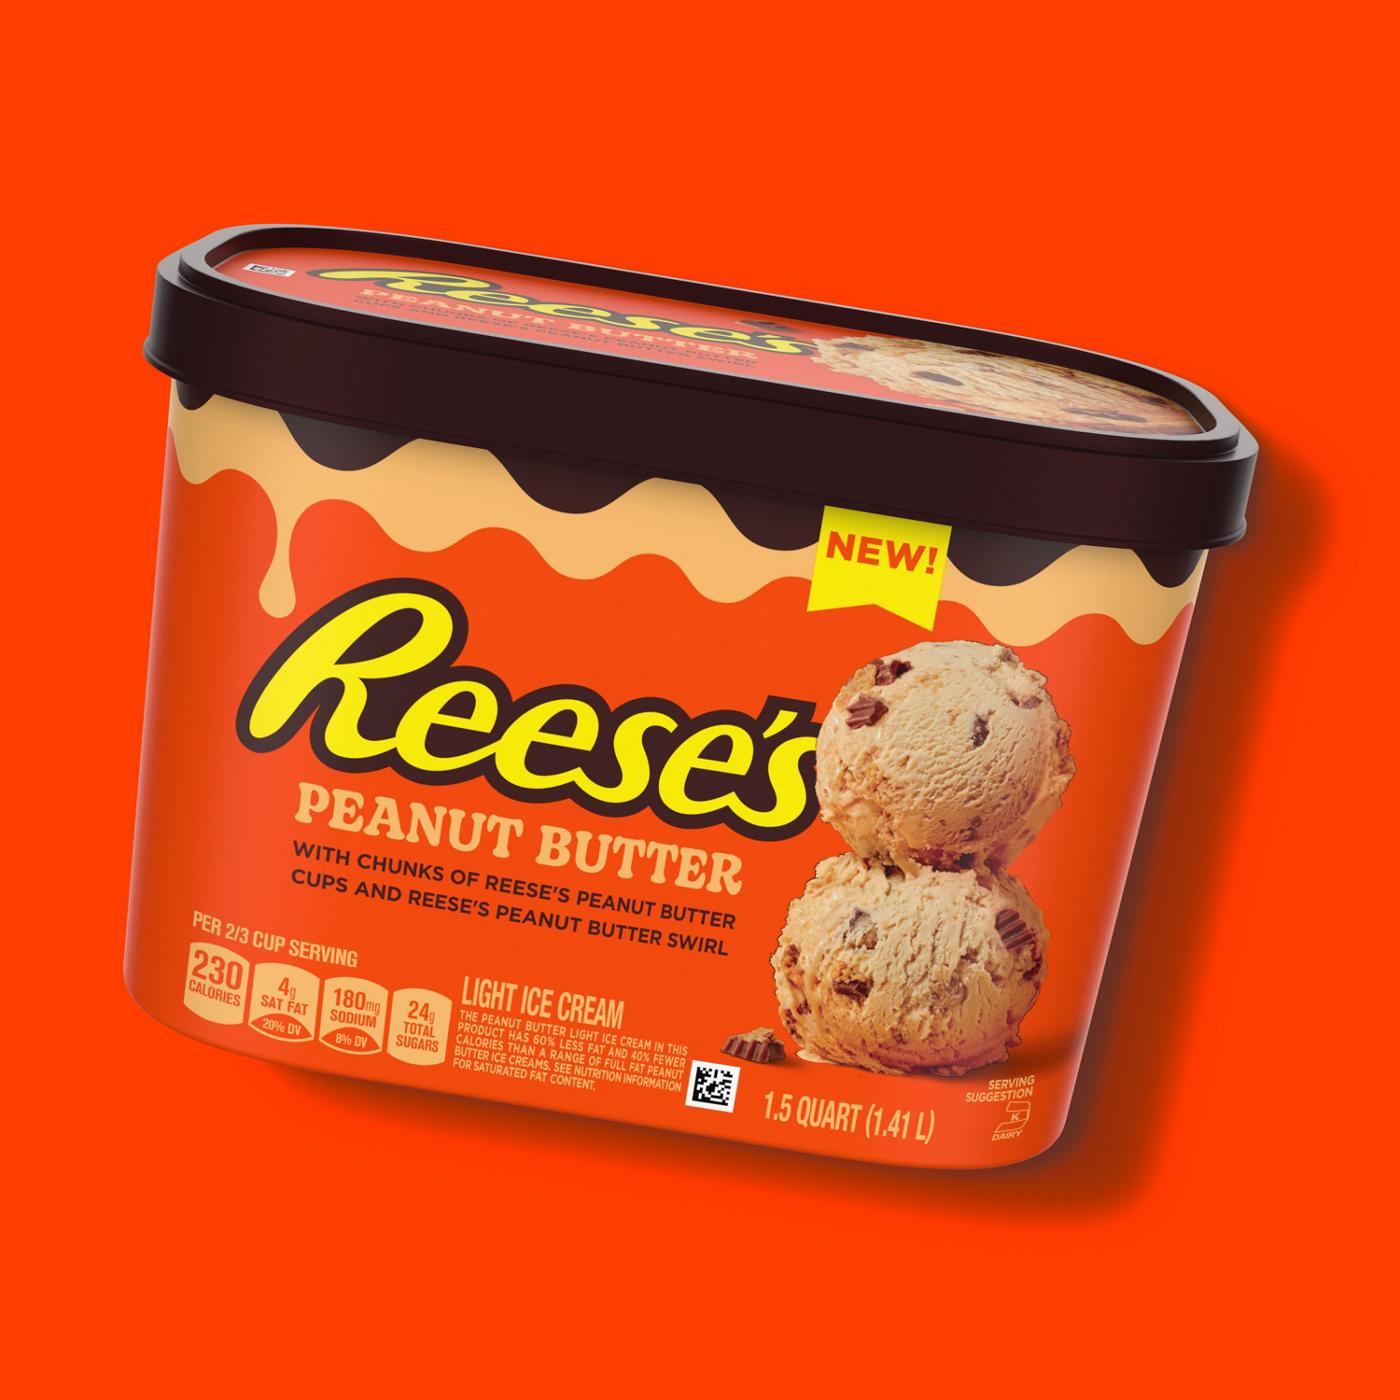 Reese's Peanut Butter Light Ice Cream with Reese's Peanut Butter Cups & Peanut Butter Swirl; image 6 of 7